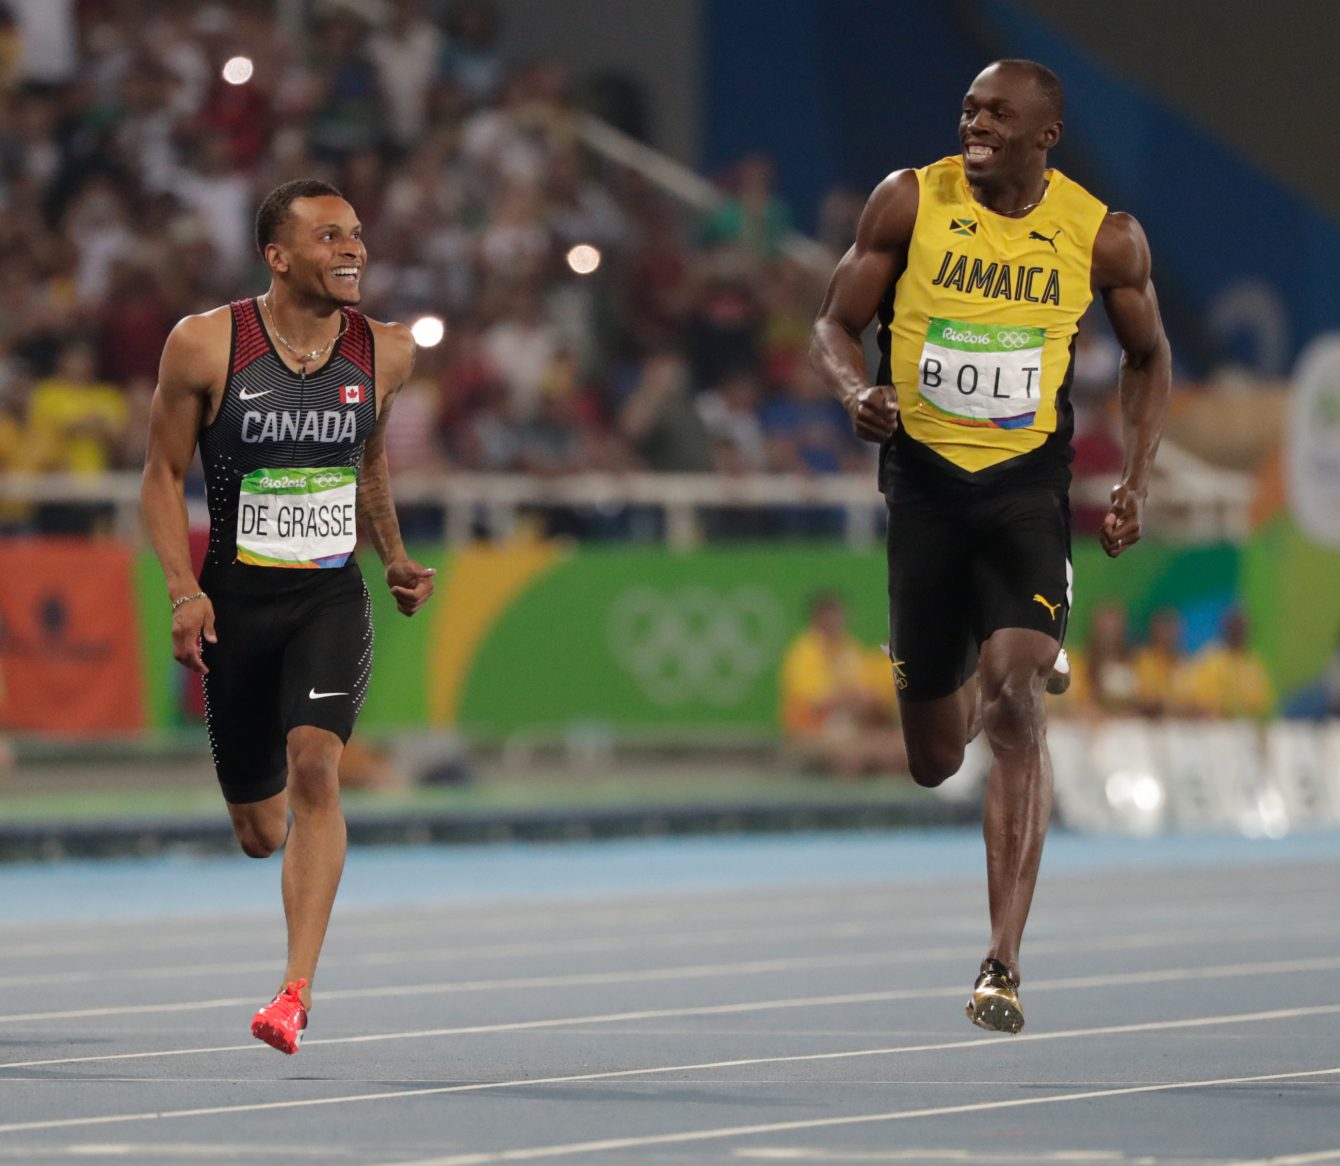 Andre De Grasse (left) and Usain Bolt share a laugh at the finish line in the semifinals of the Olympic 200m on August 17, 2016 in Rio de Janeiro. 